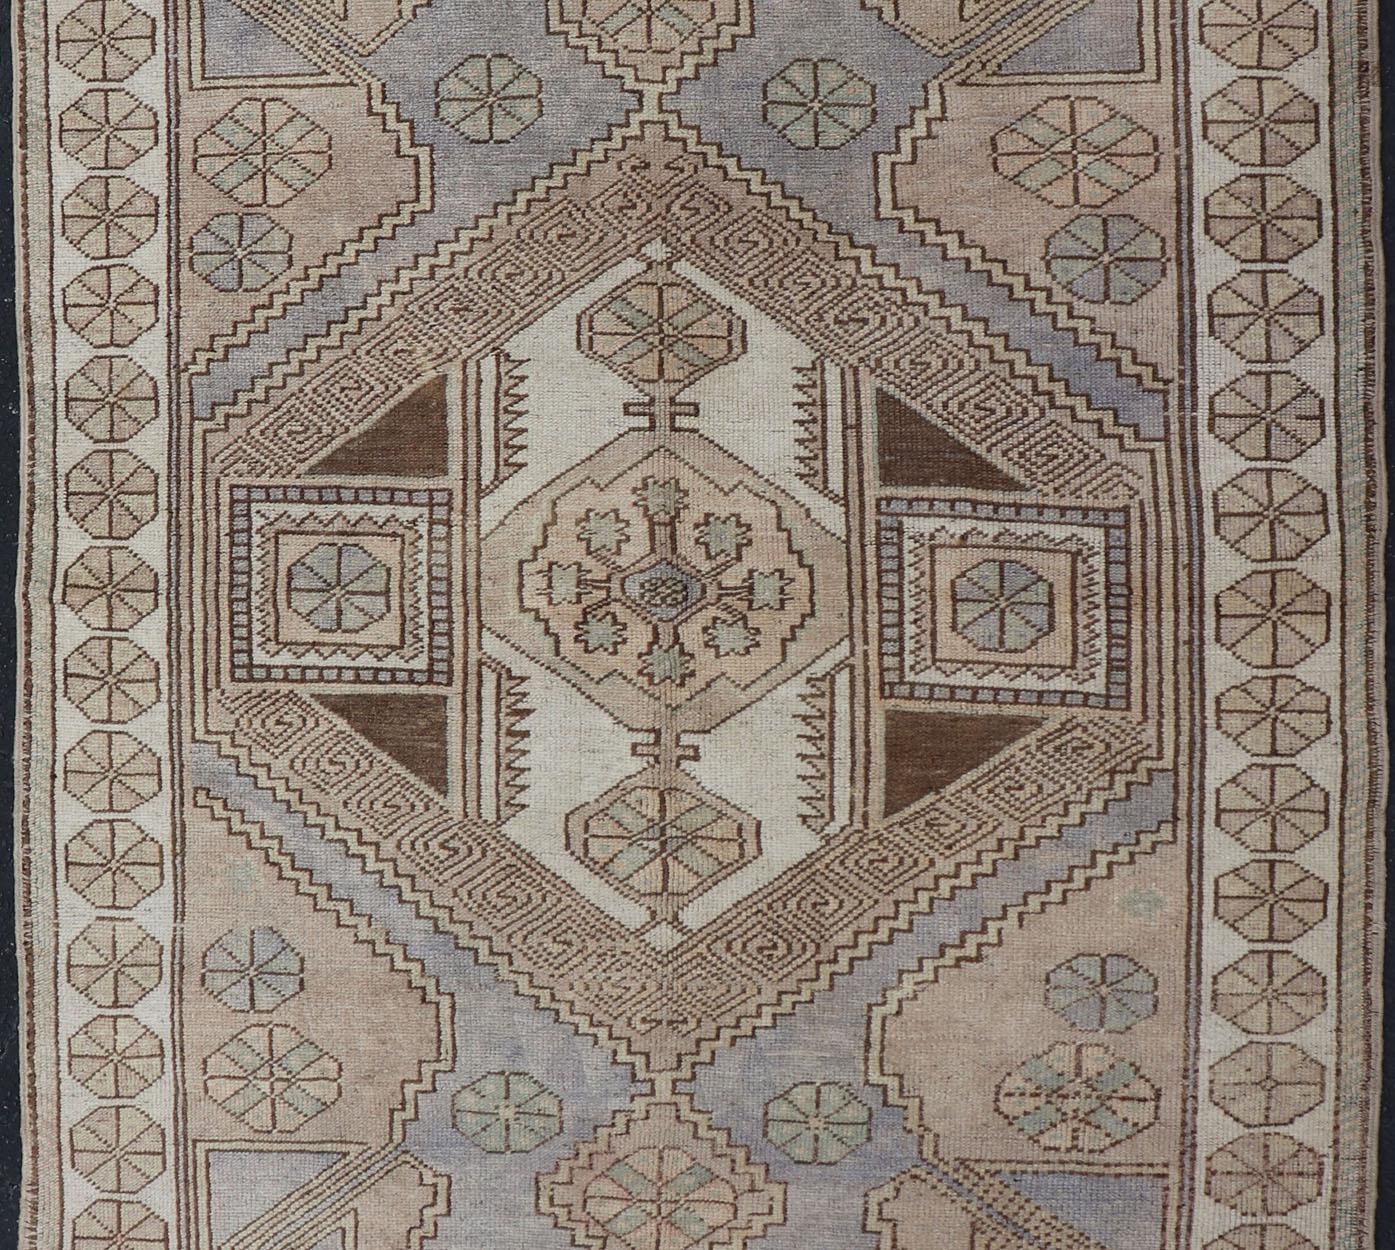 This vintage Turkish Oushak rug features a singular medallion design, filled with geometric motifs and flanked by complementary motifs in the central field and surrounding border. The design is rendered in a variety of lavender and taupe color